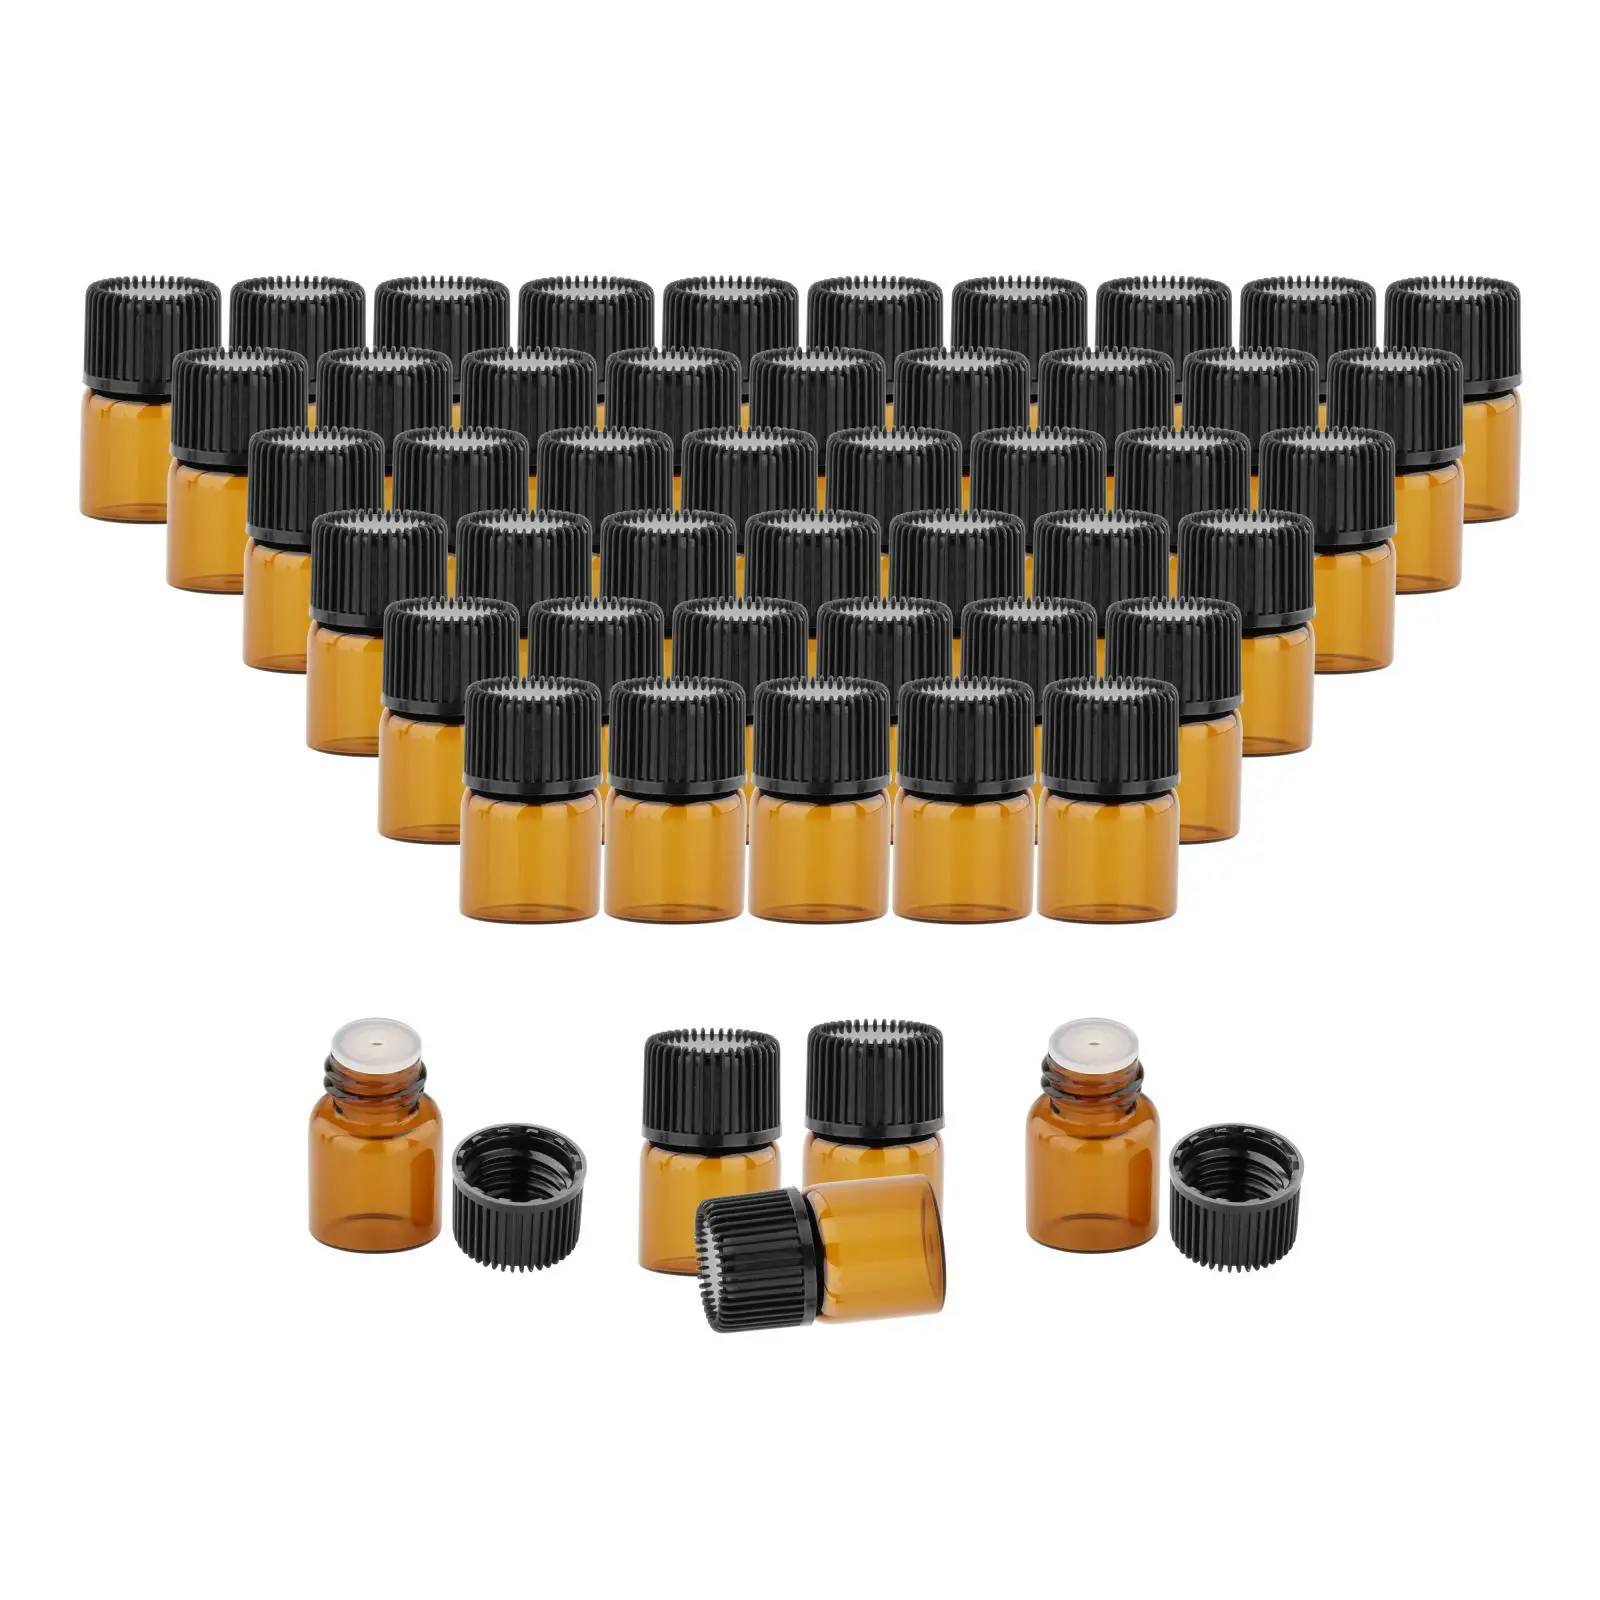 50x Amber Mini Glass Bottles, Screw Cover Empty Leakproof Small Essential Oil Bottle for Chemical Liquid Massage Oils DIY